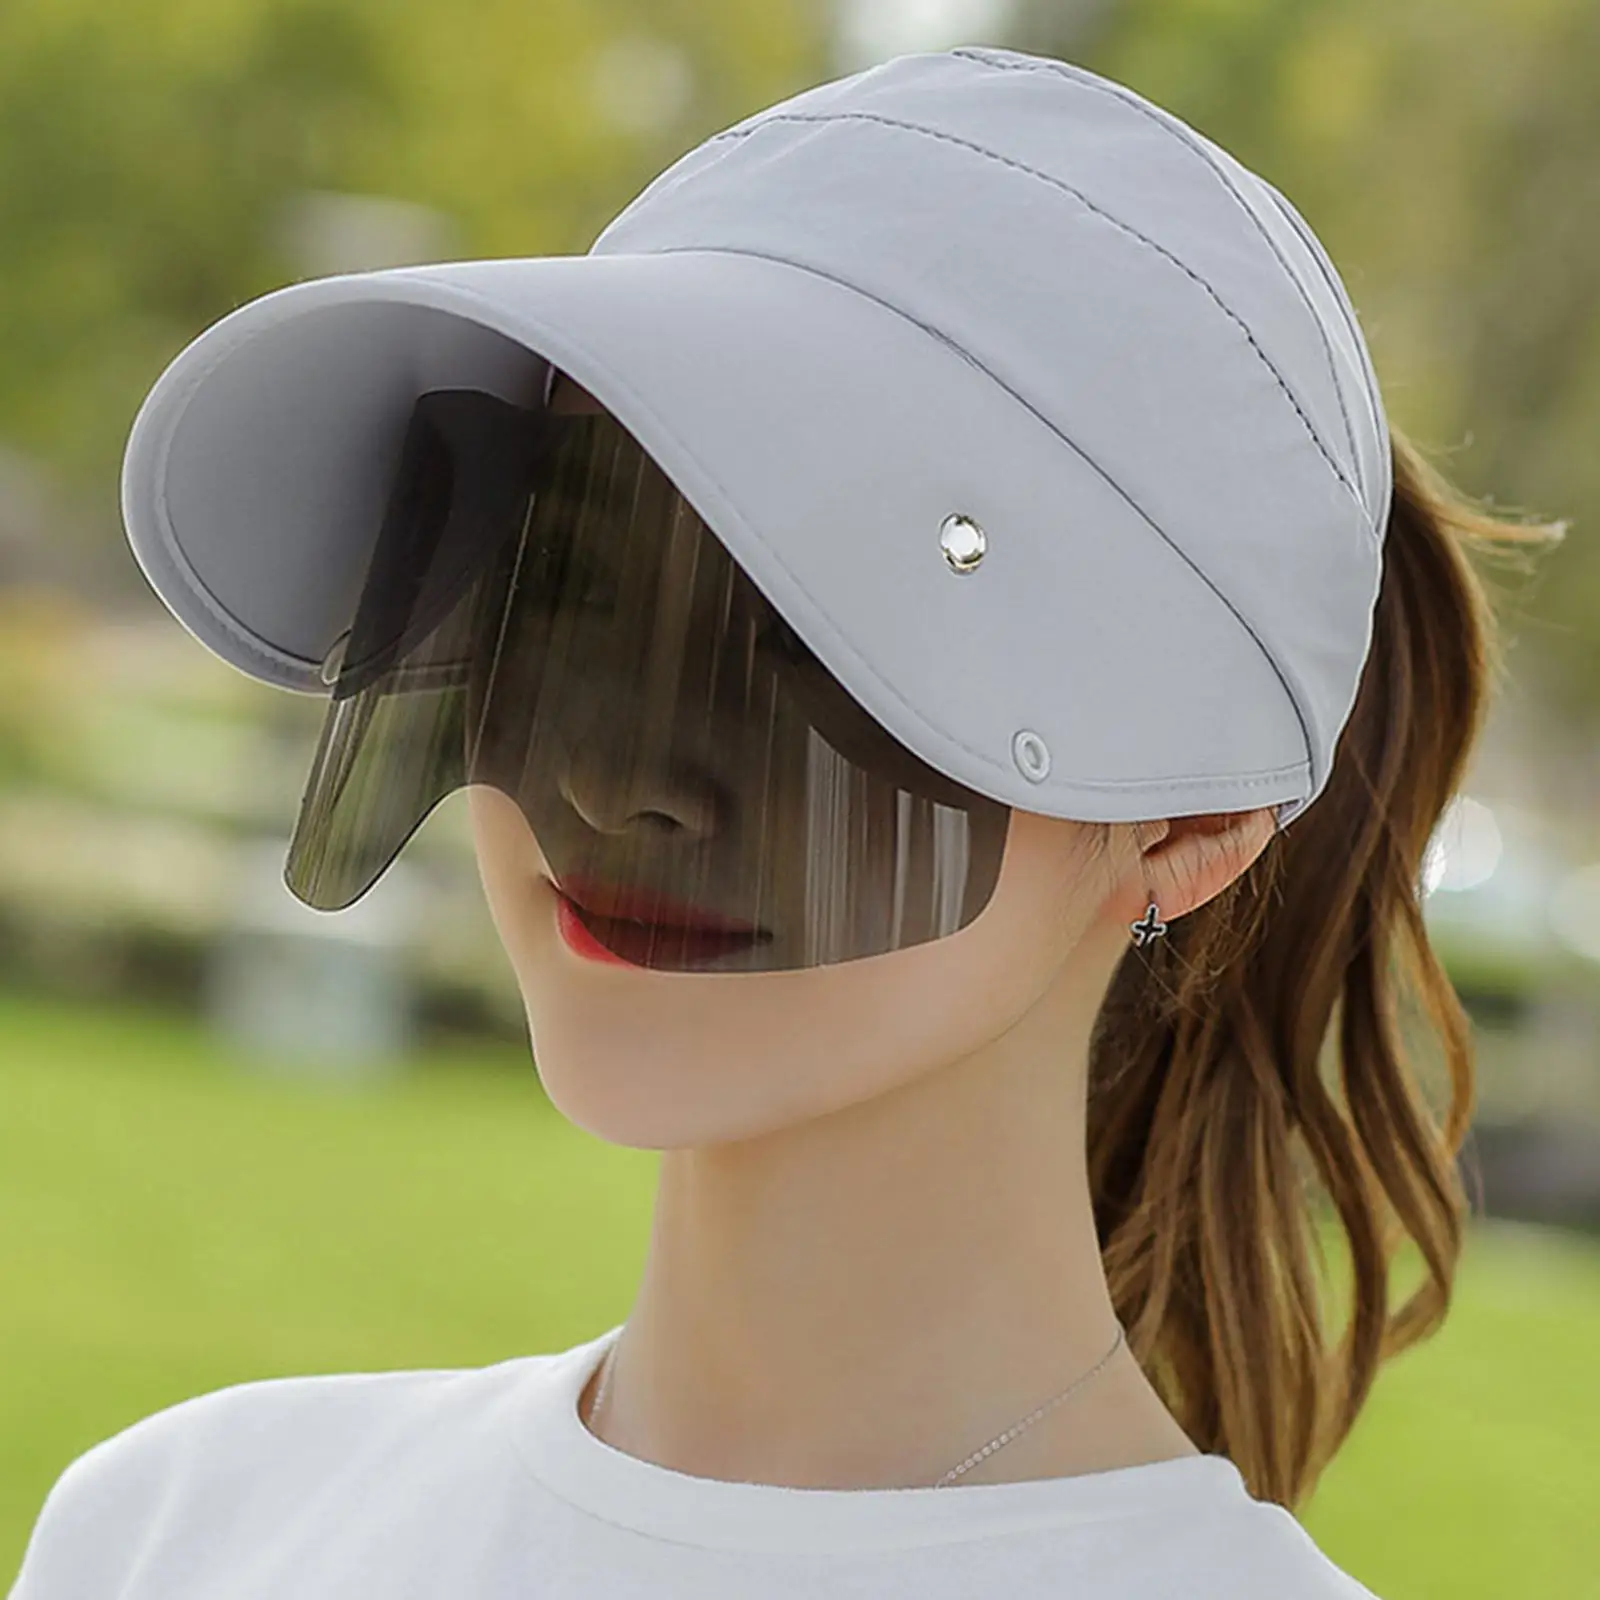 Women Sun Protective Hat Wide Brim Anti-Uv Summer Open Top Floppy Outdoor Beach Outdoor Cycling UV Protection Caps Visor